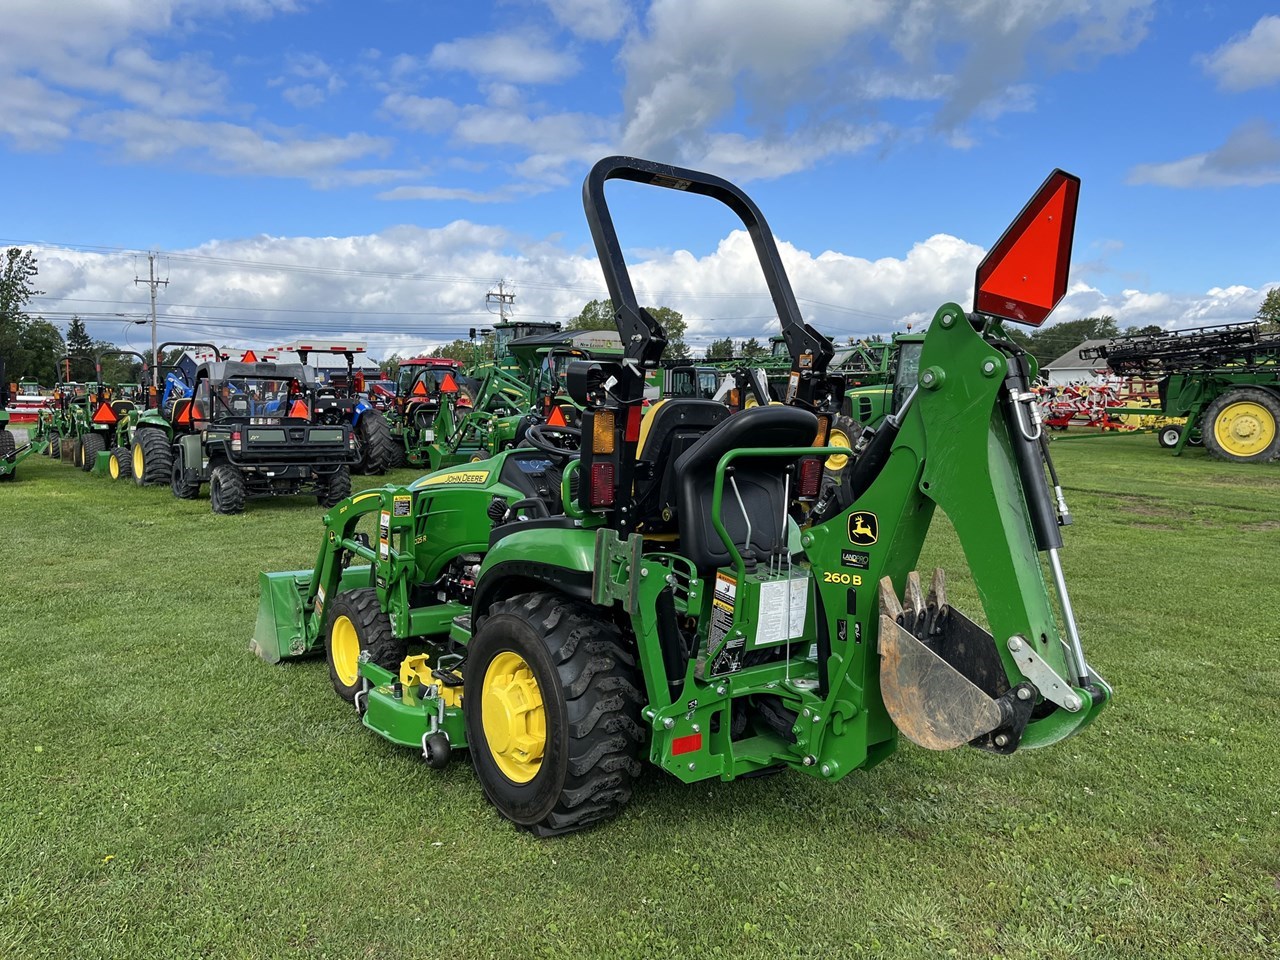 2021 John Deere 2025R Tractor - Compact Utility For Sale